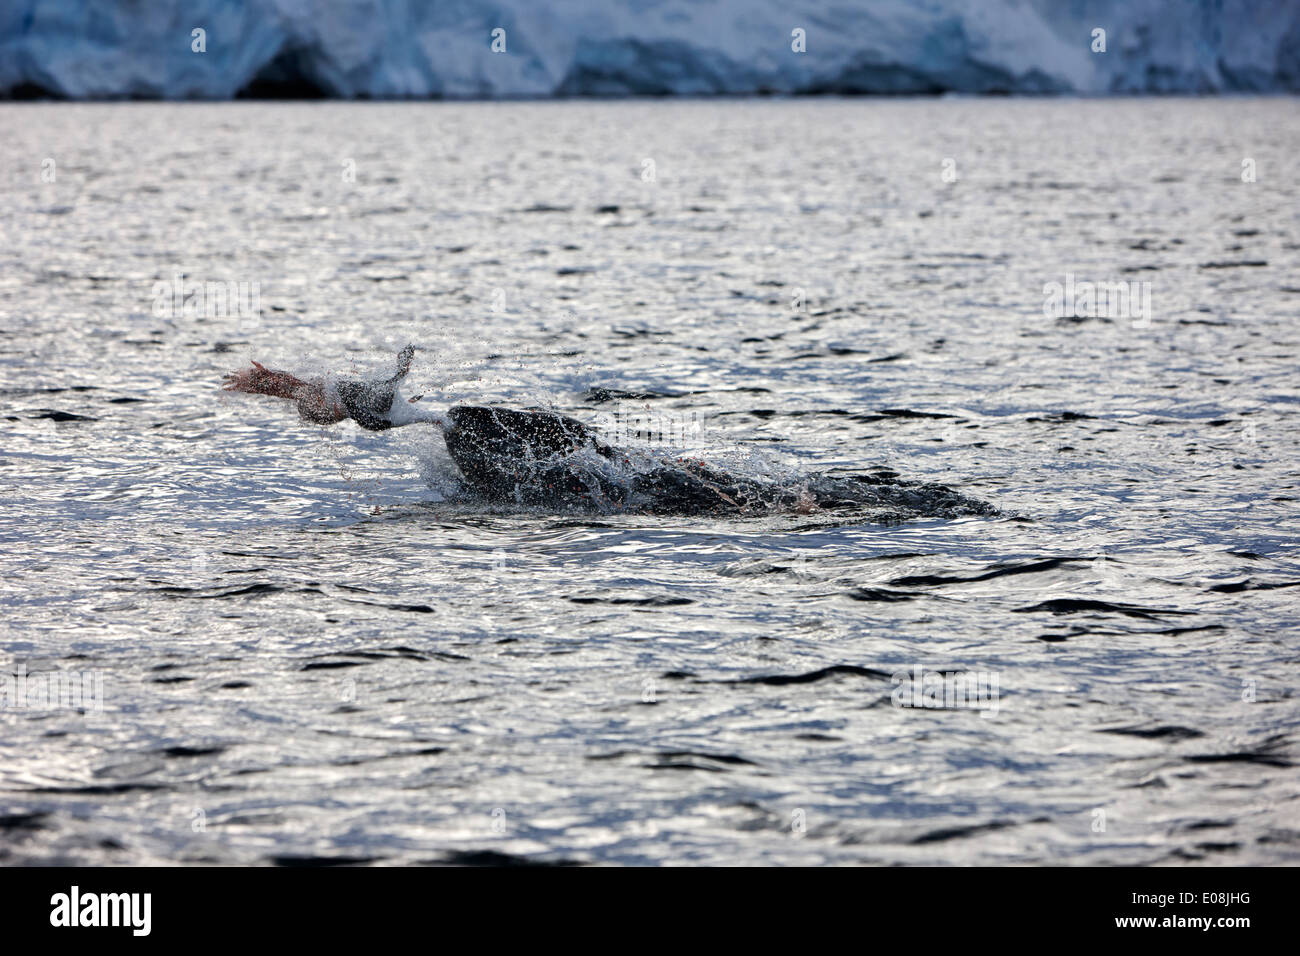 leopard seal killing a penguin by swinging violently and smacking onto the surface of the water in port lockroy Antarctica Stock Photo